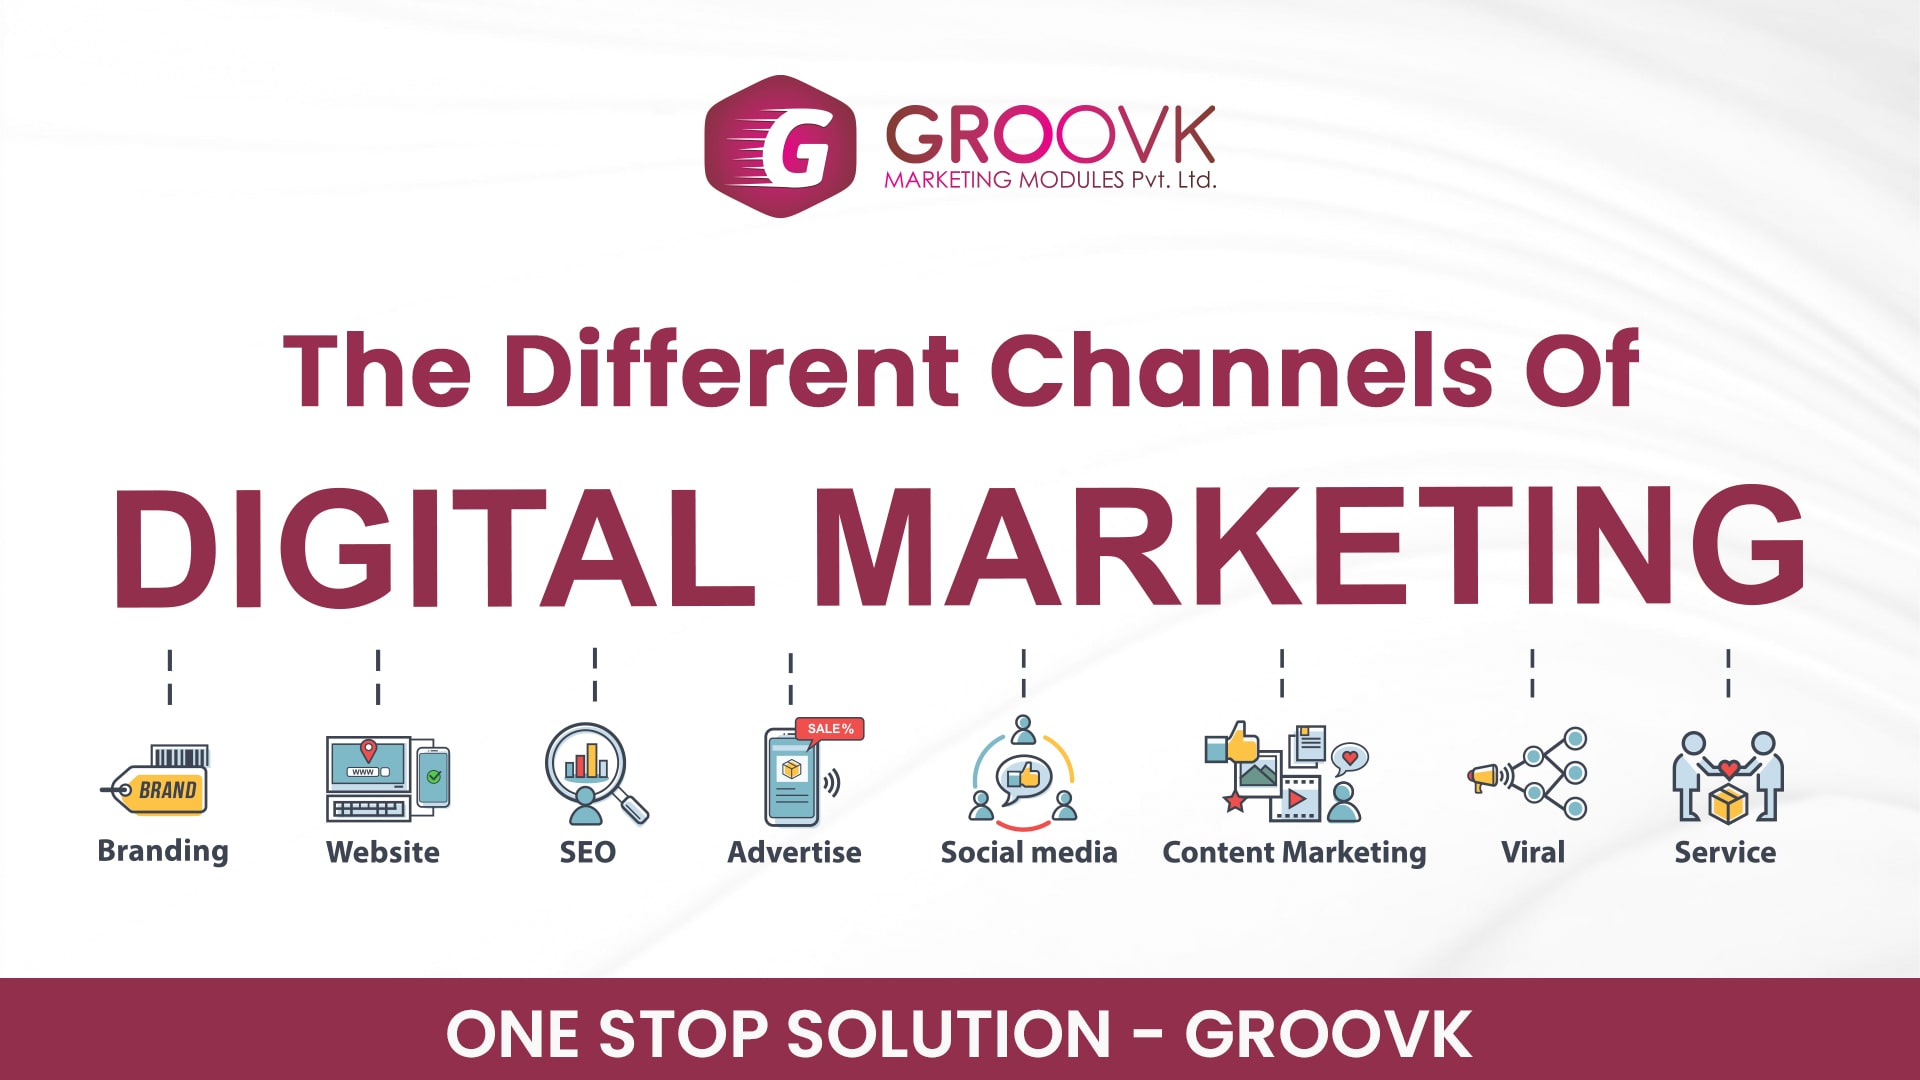 The Different Channels of Digital Marketing - Groovk Marketing